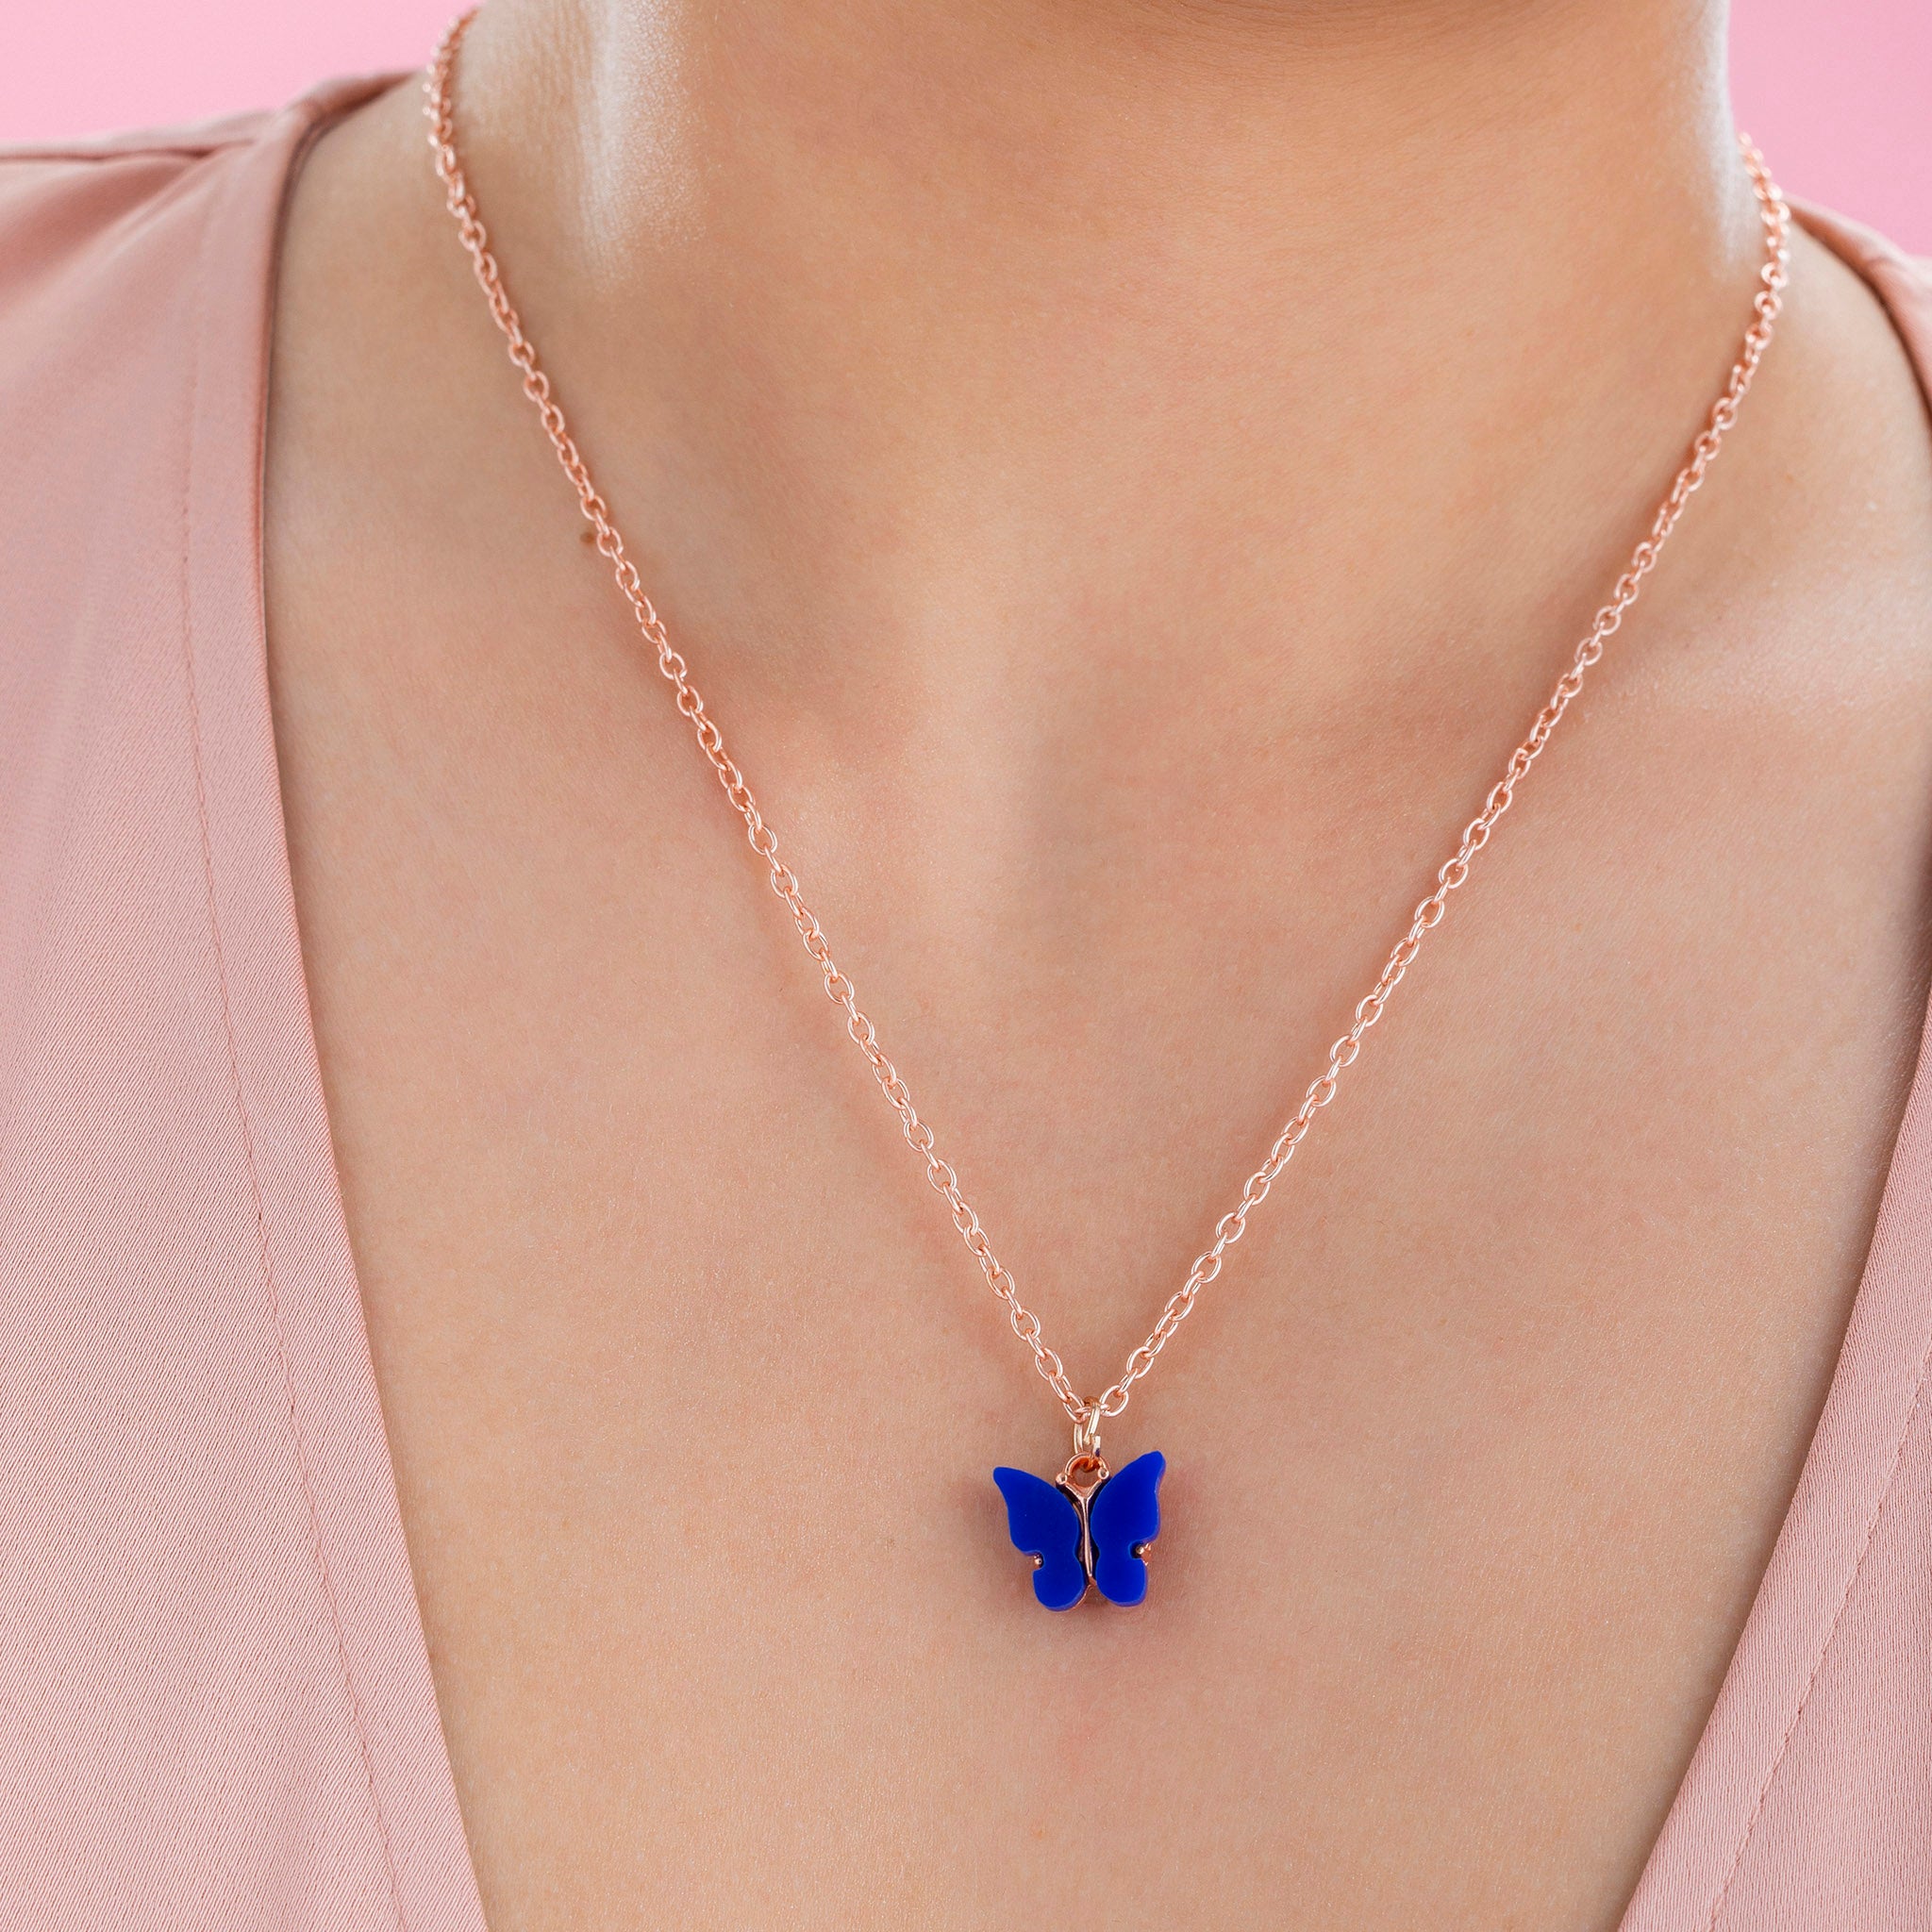 PRAO Pretty Butterfly Dark Blue Pendant With Rose Gold Chain